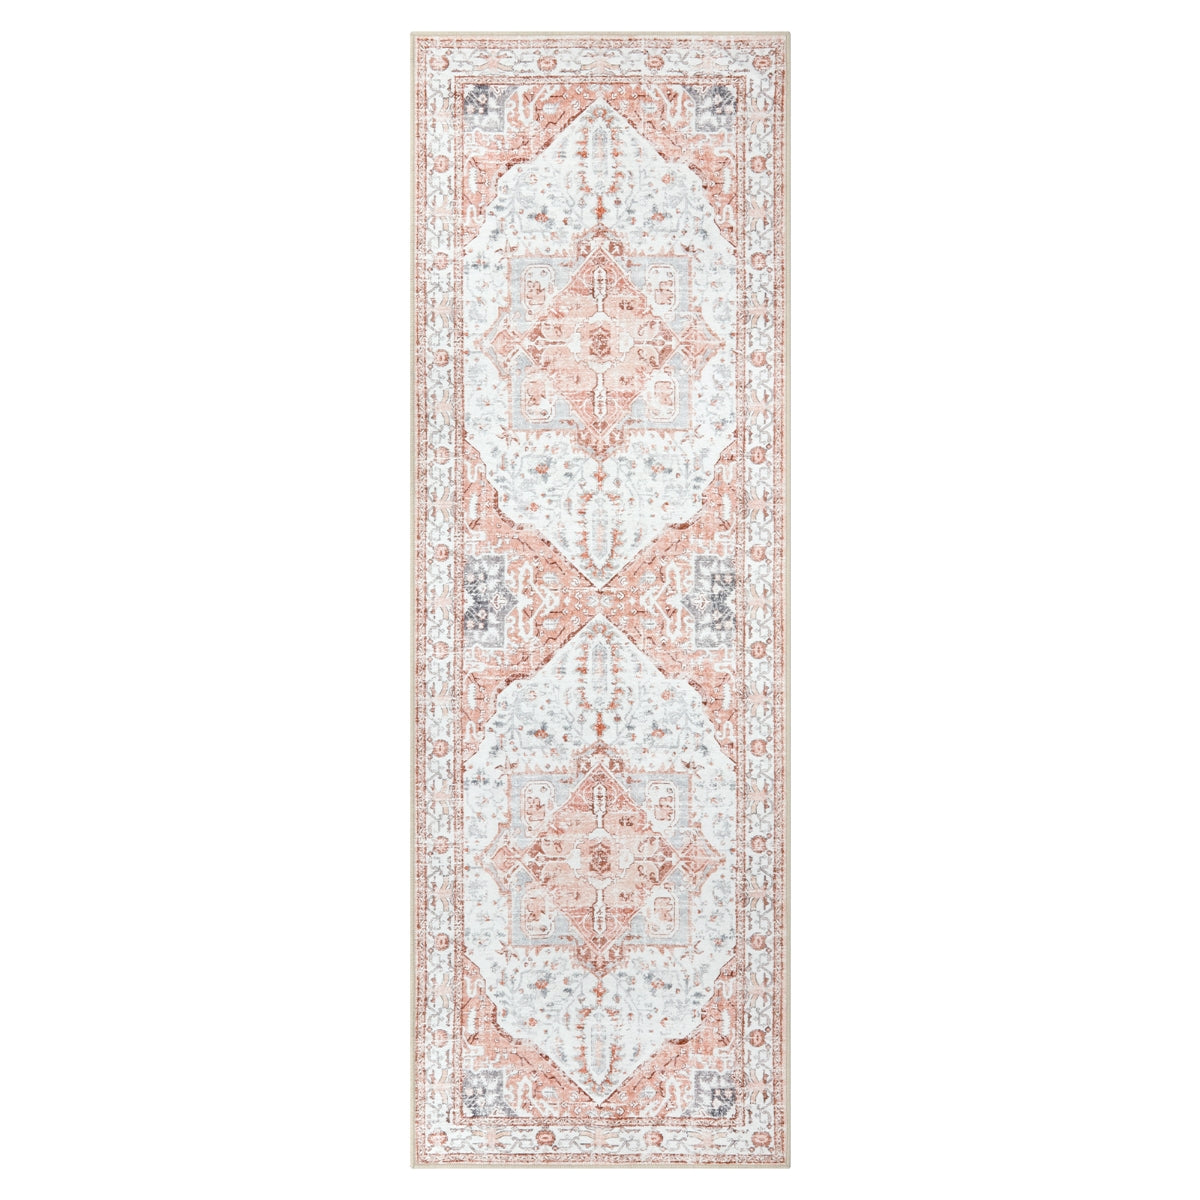 Harriet Traditional Medallion Distressed Pink Area Rug